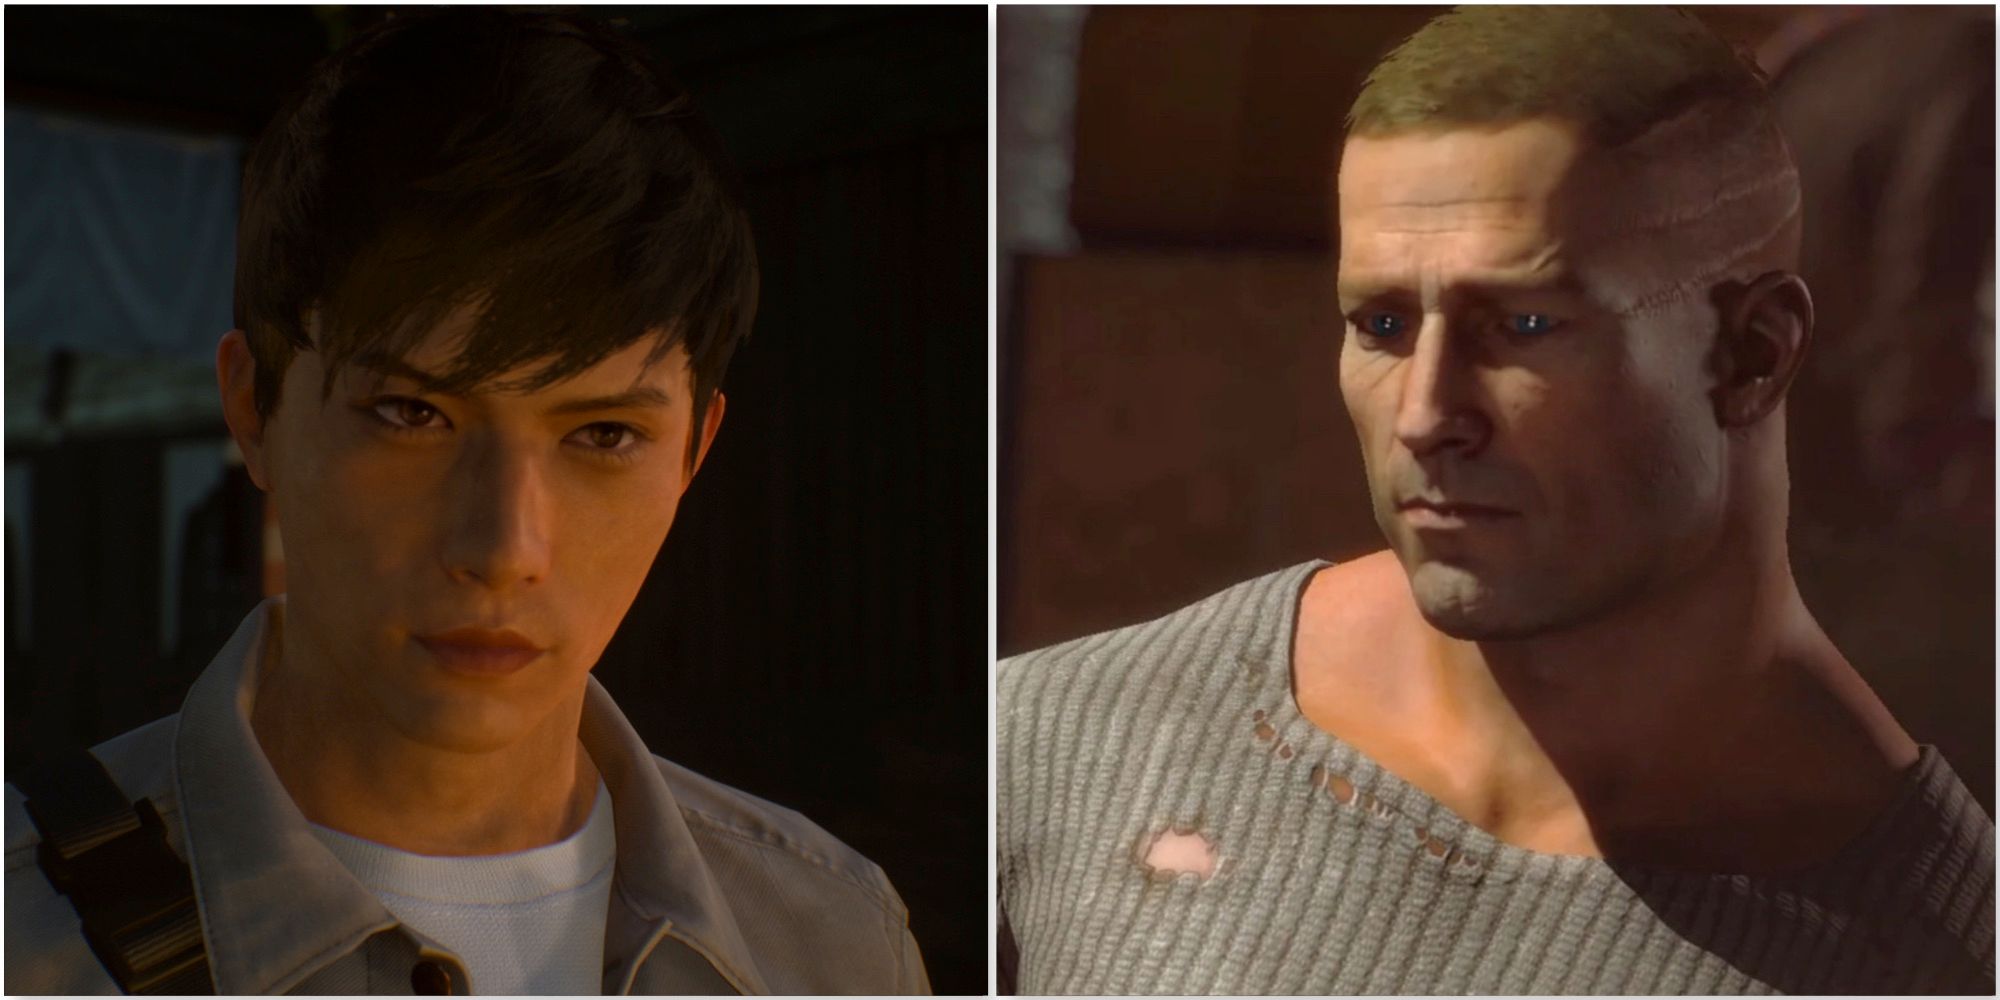 Akito in Ghostwire Tokyo and BJ Blazkowicz in Wolfenstein The New Order